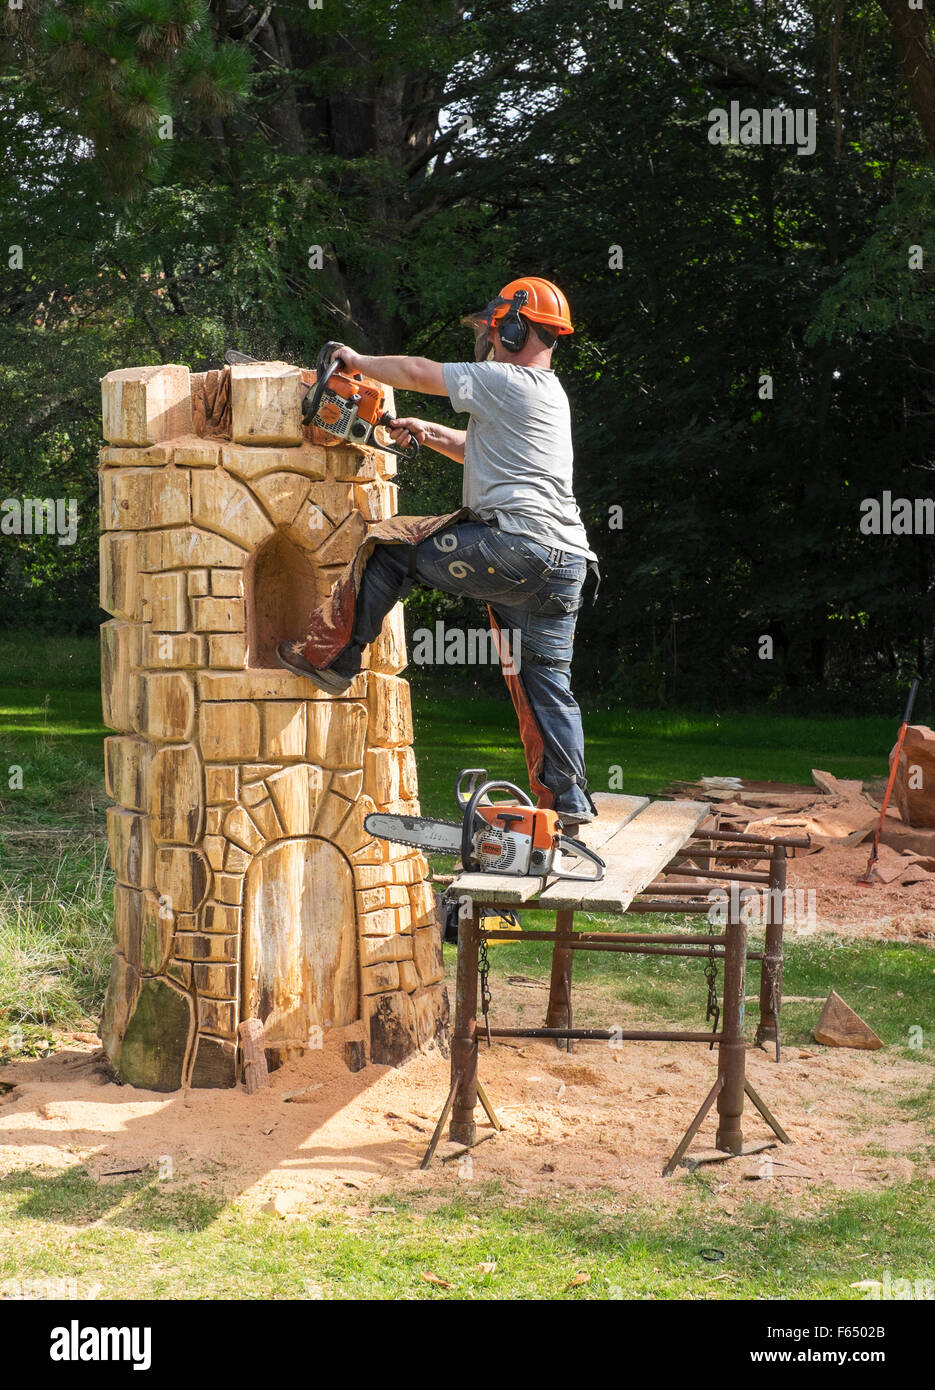 A chainsaw sculptor creating a tower sculpture from a tree trunk at the Cranborne Chase Woodfair, Wiltshire, UK Stock Photo